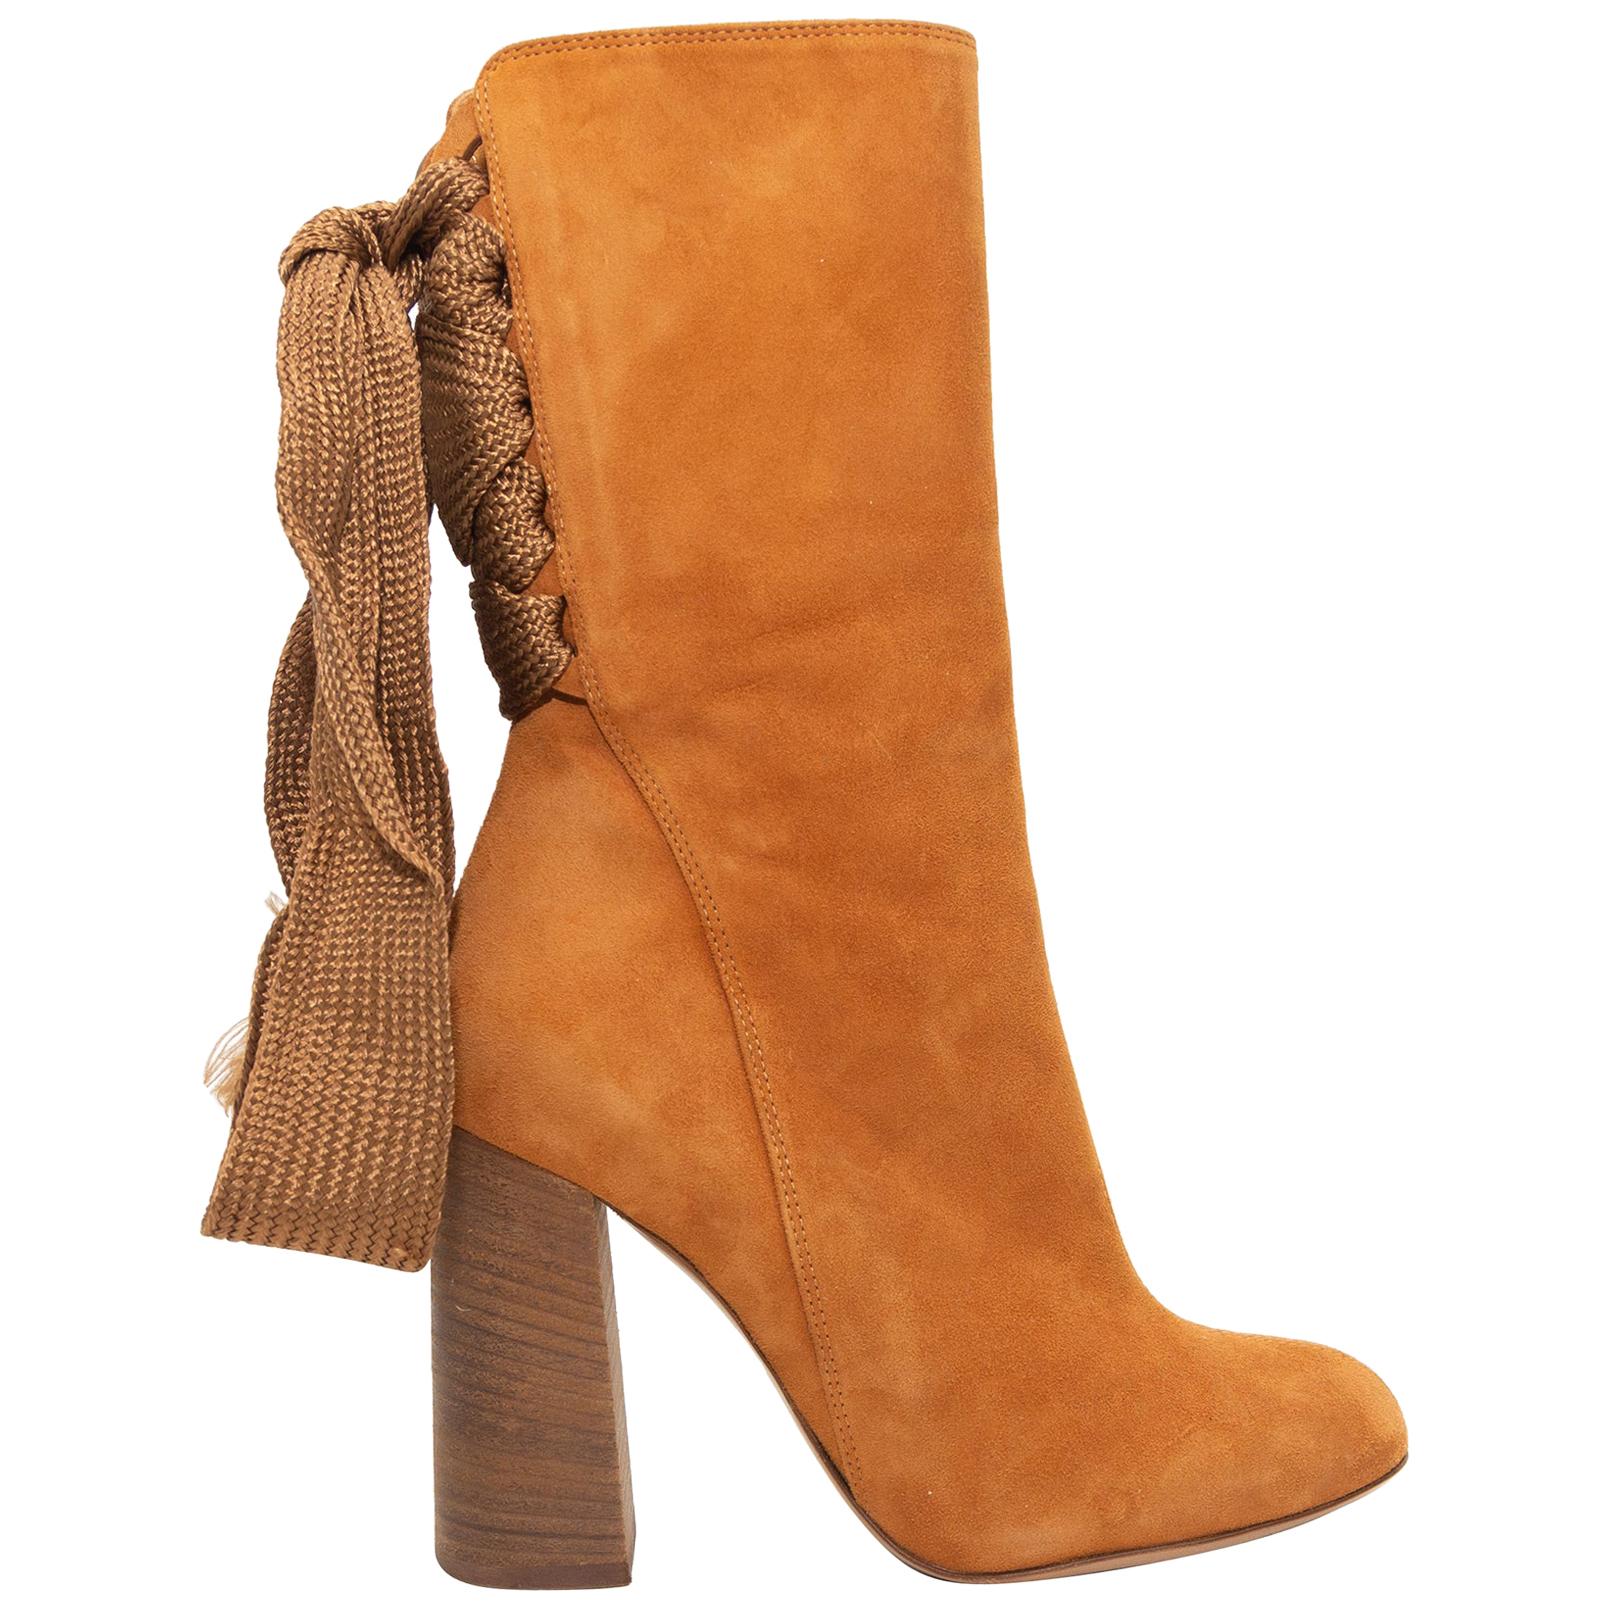 Chloe Tan Suede Harper Ankle Boots For Sale